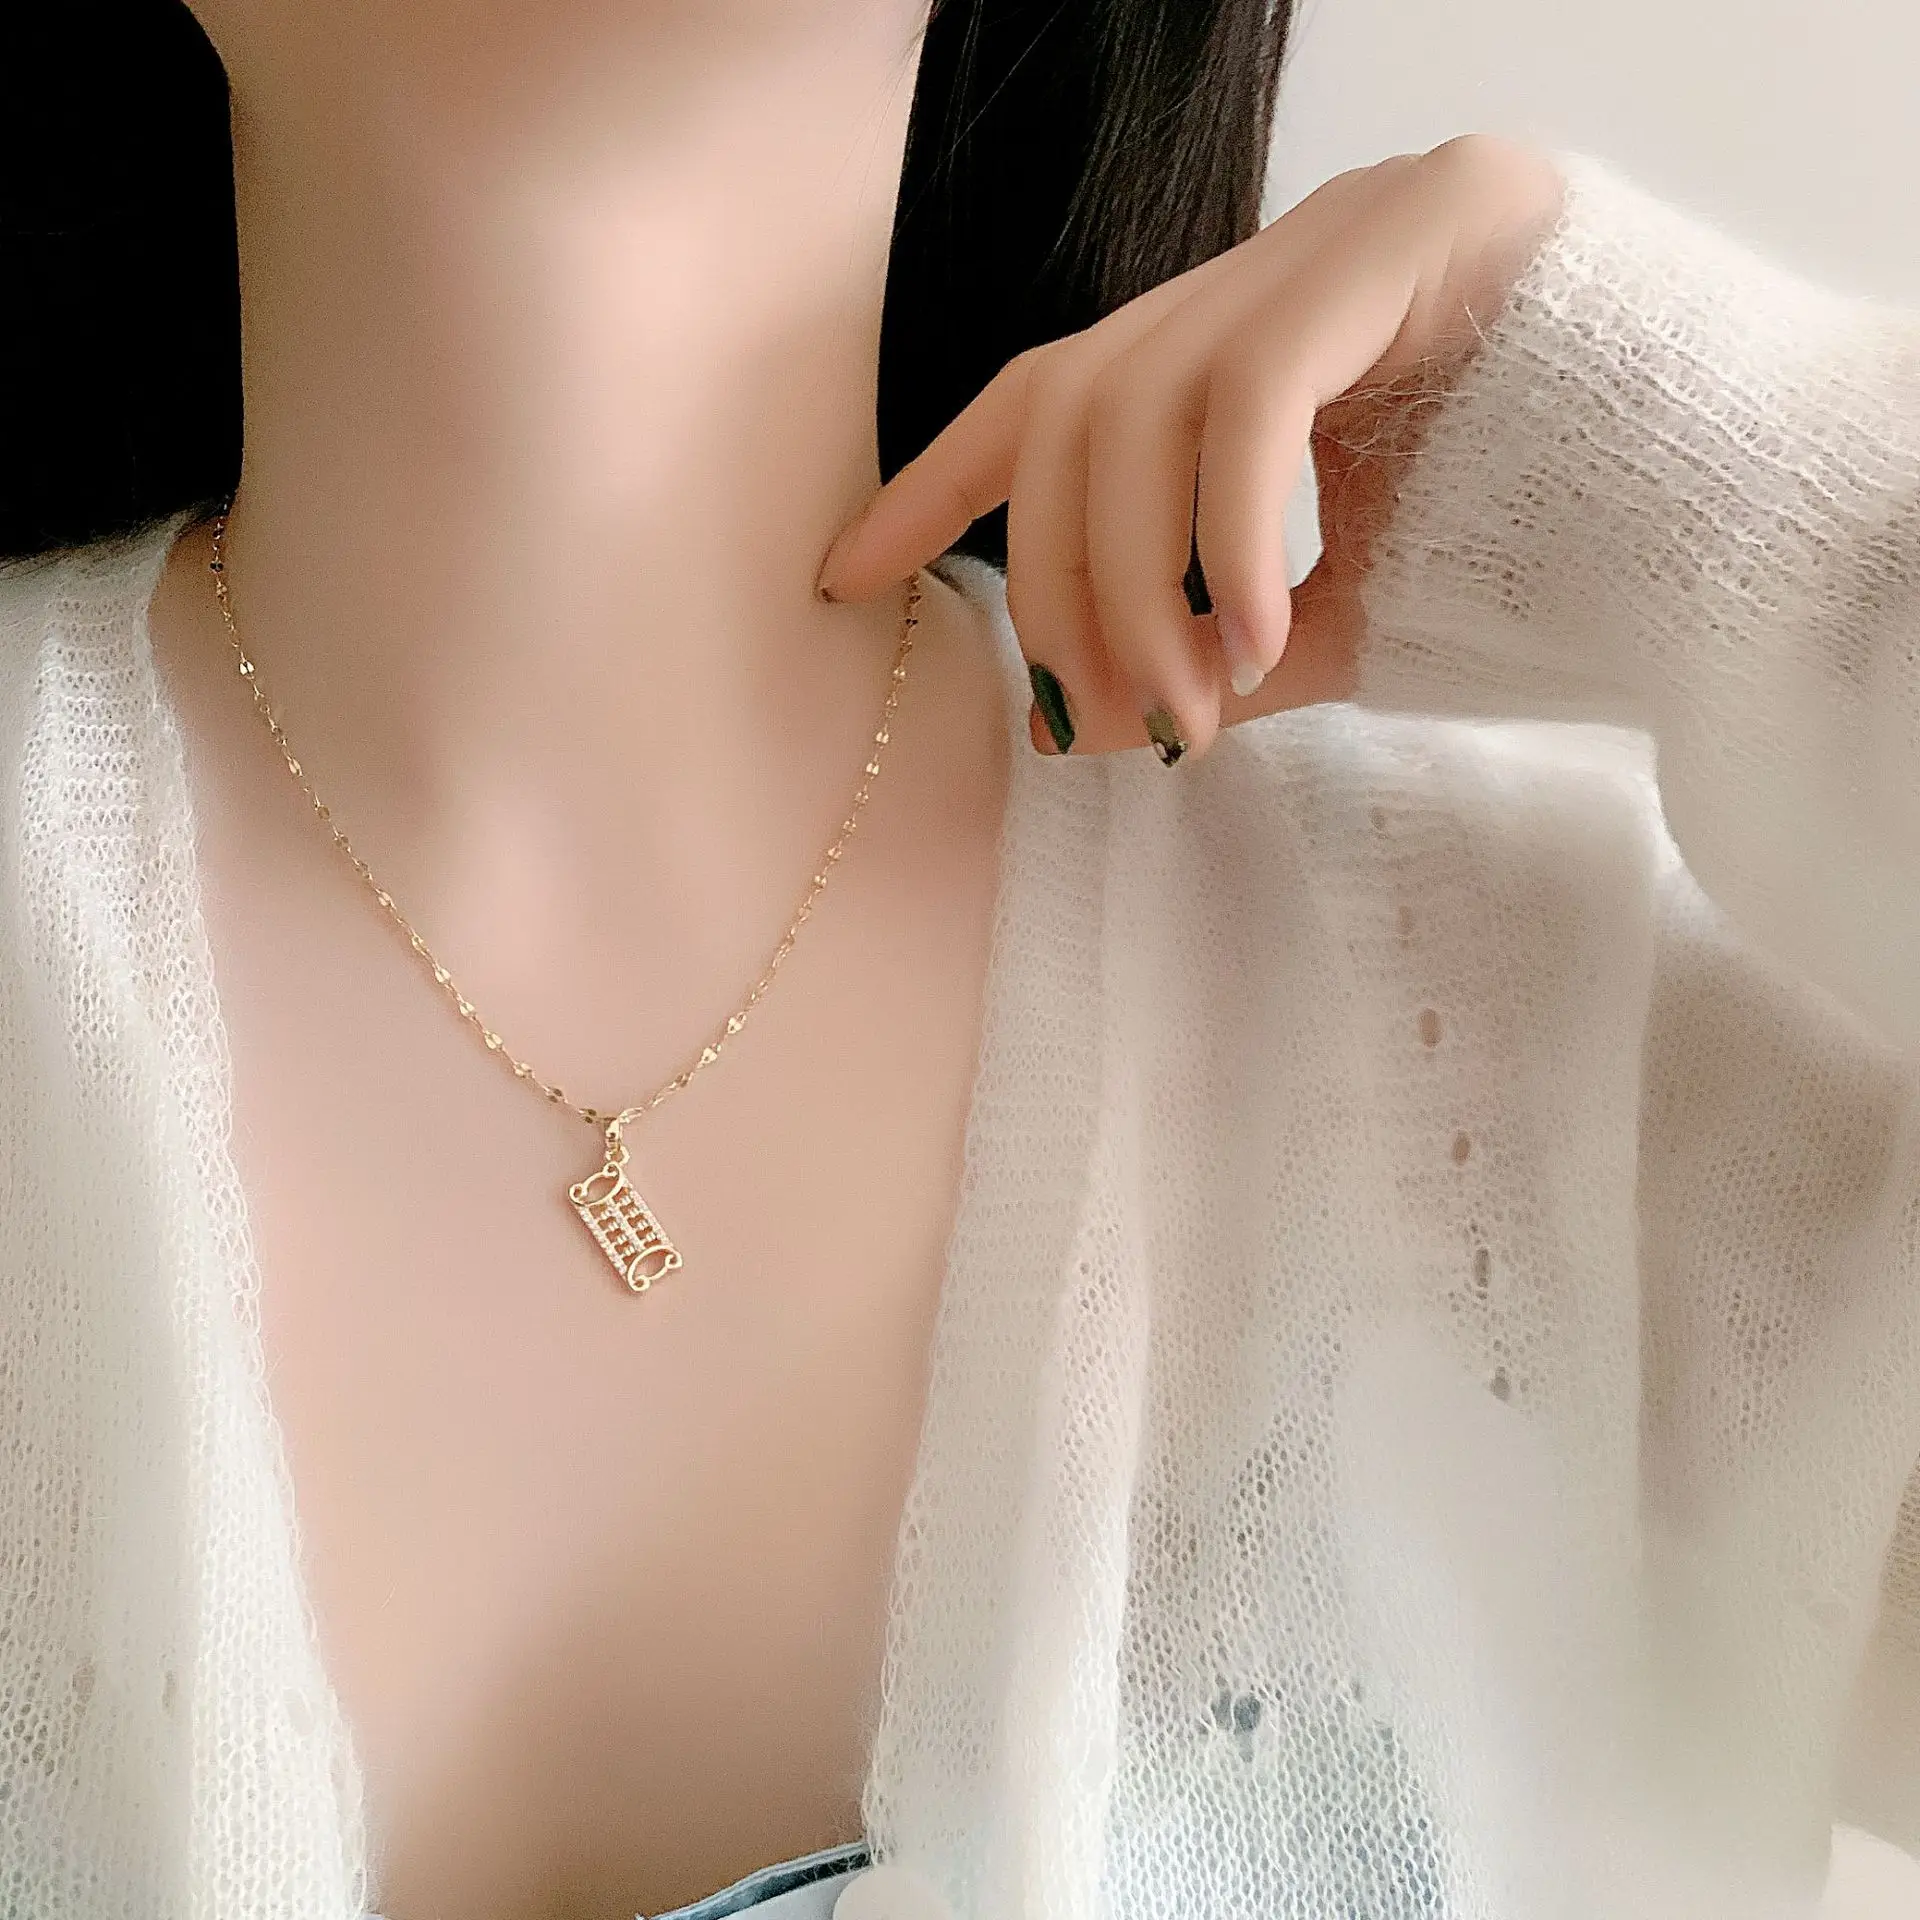 Flybloom Hollow Bee Fish Bone Shape Pendant Necklace Clavicle Chain Charm Accessories For Women,Gold Color